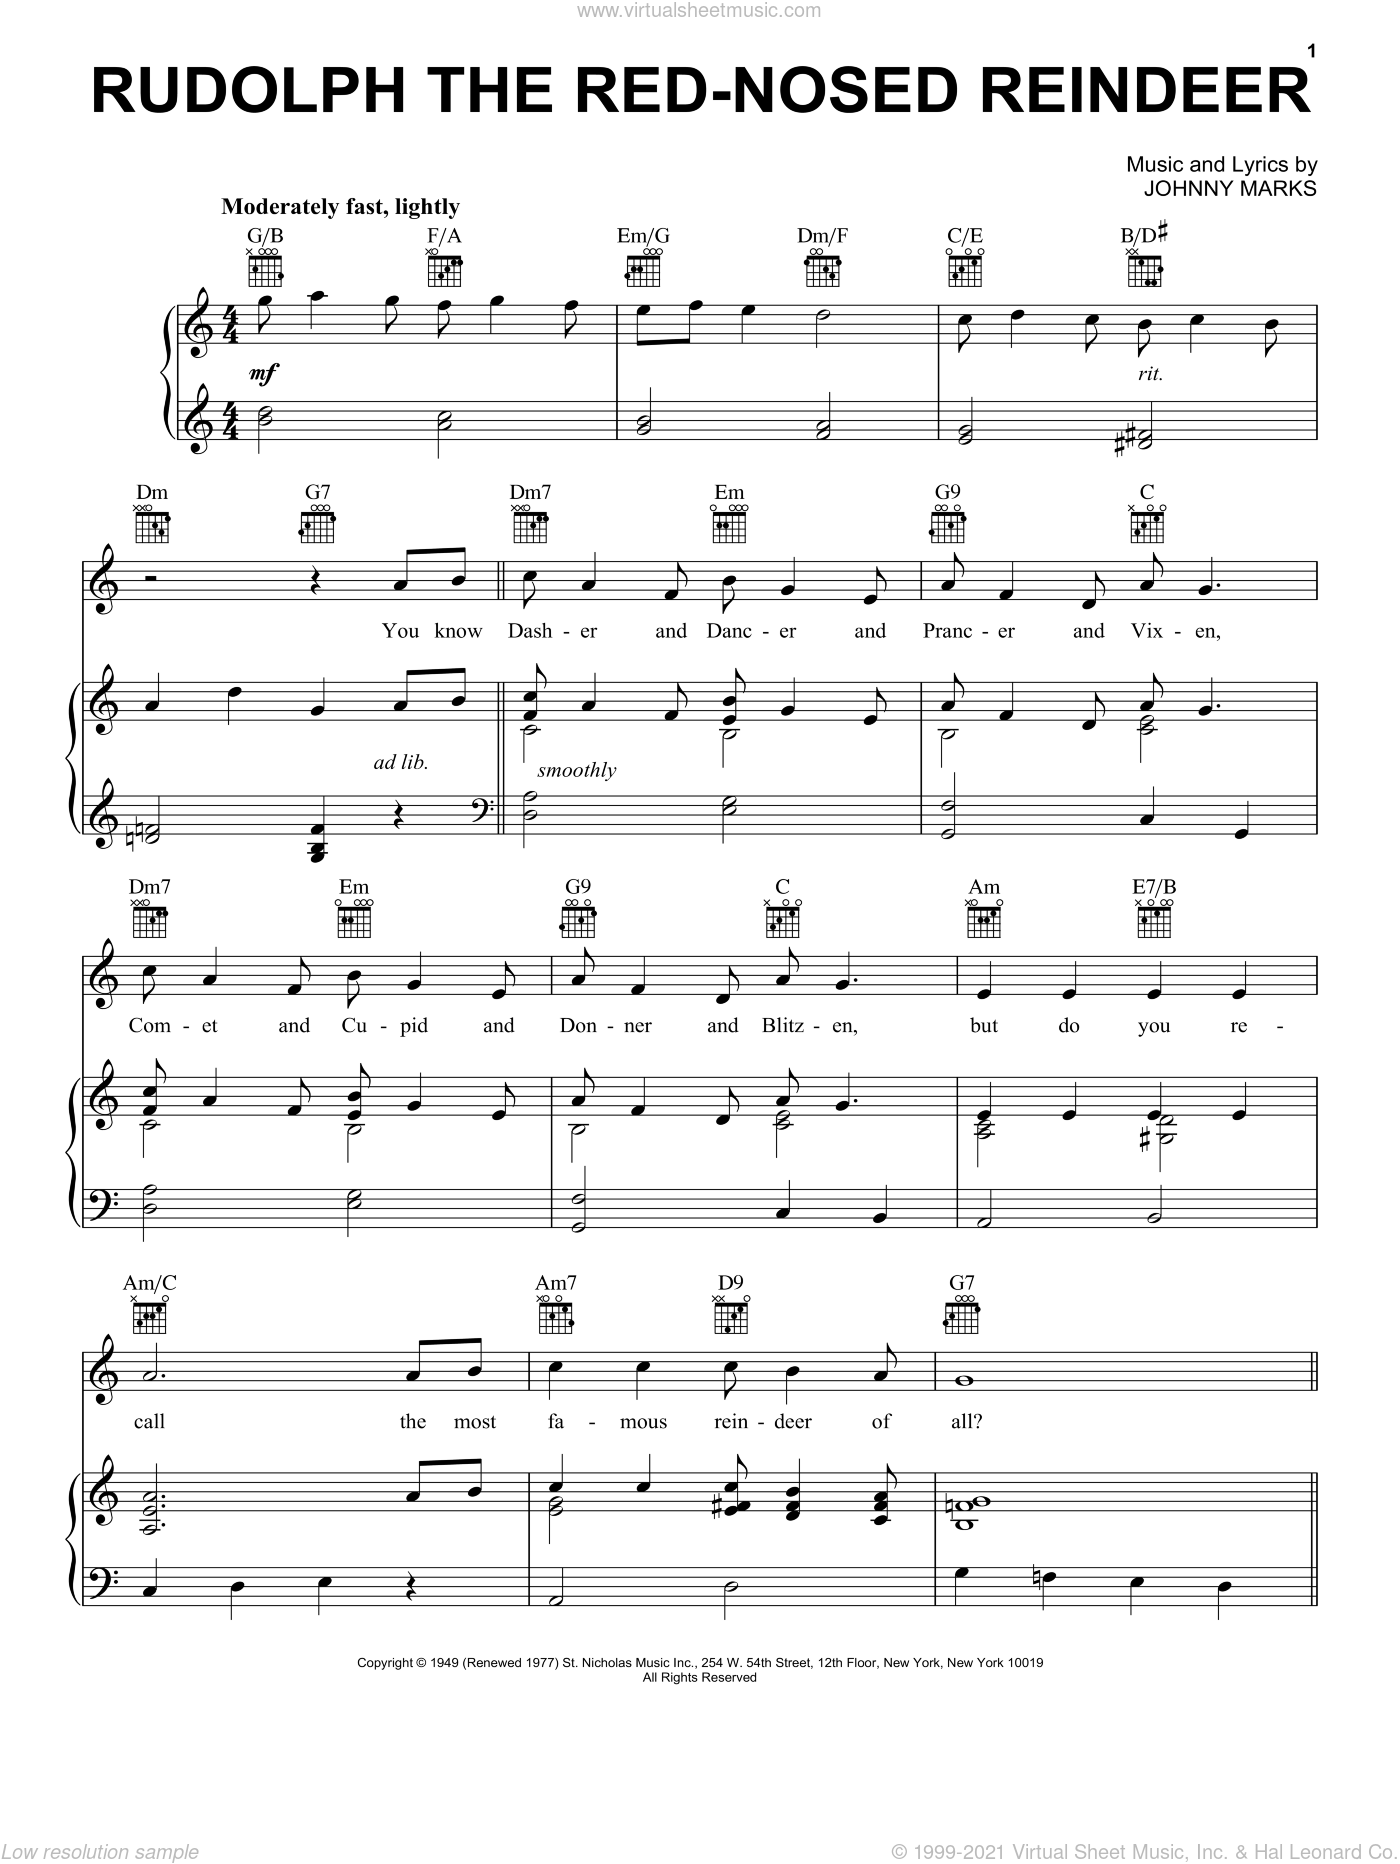 patron Rig mand Hav Rudolph The Red-Nosed Reindeer sheet music for voice, piano or guitar